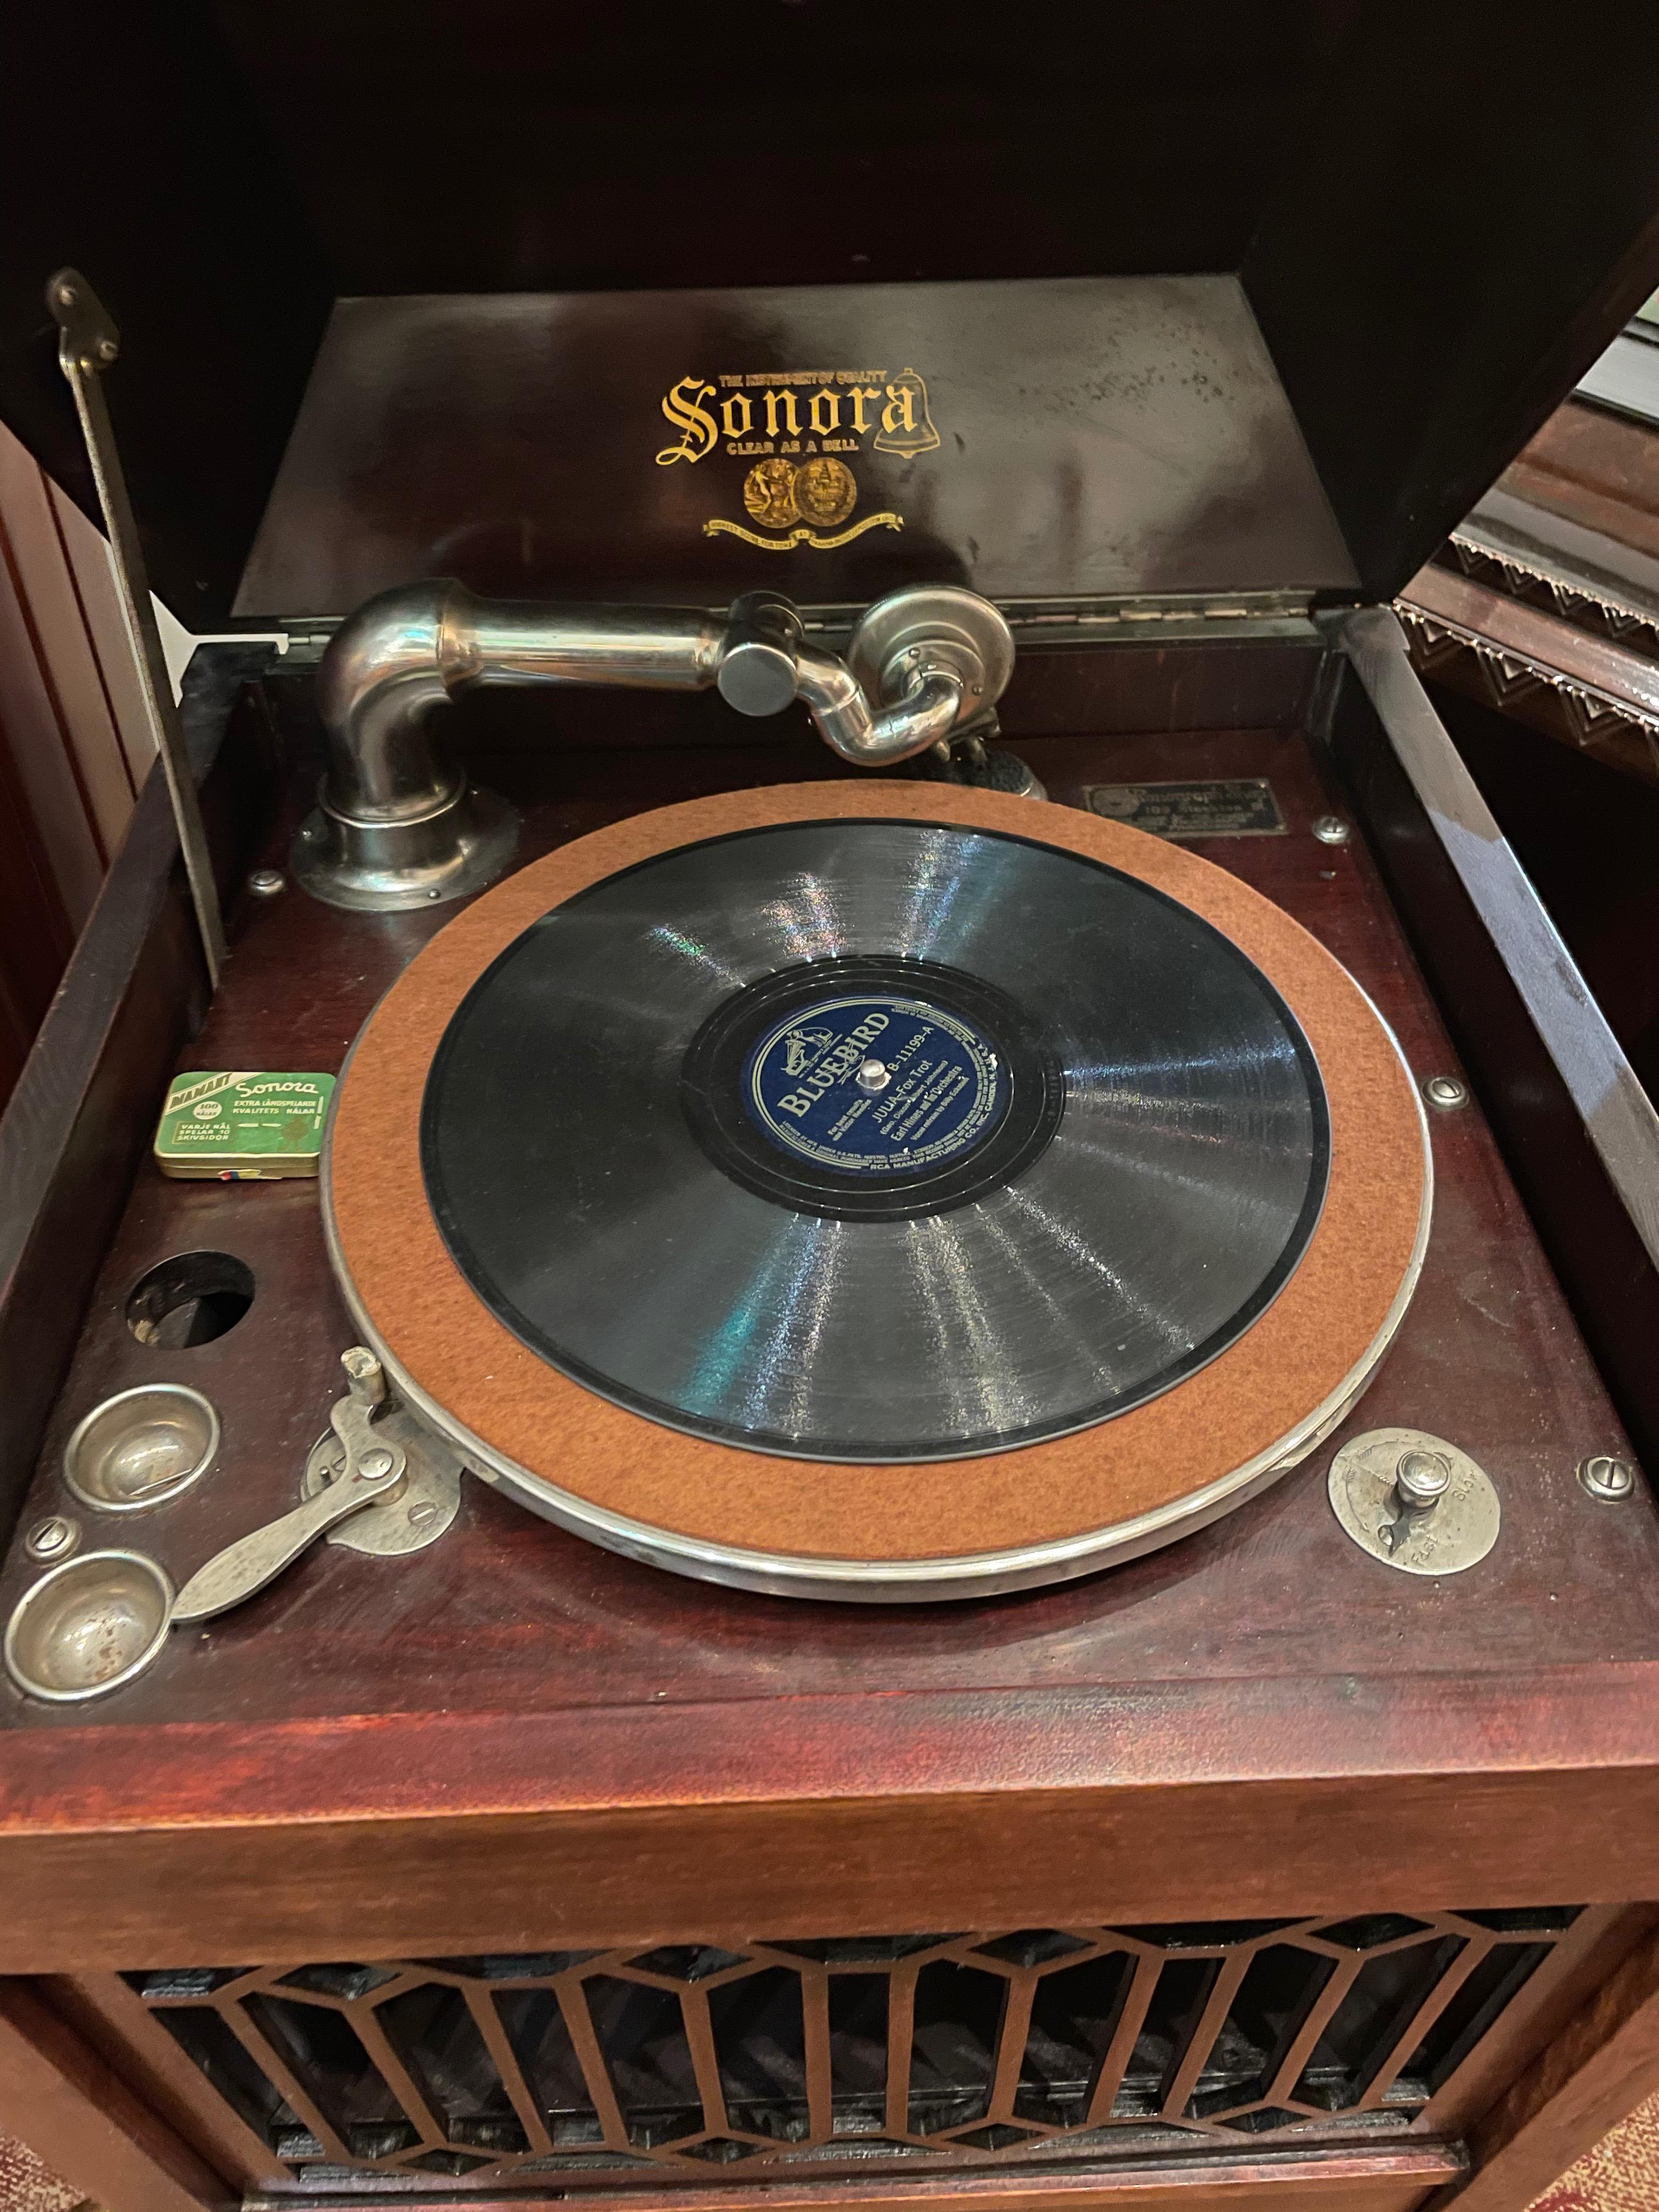 Sonora Windup Antique 1915 Phonograph record player. Signed by the famous maker, “Sonora,” this floor model wind-up phonograph is in fine playing original condition. The beautiful mahogany case has been cleaned and polished, the interior still has